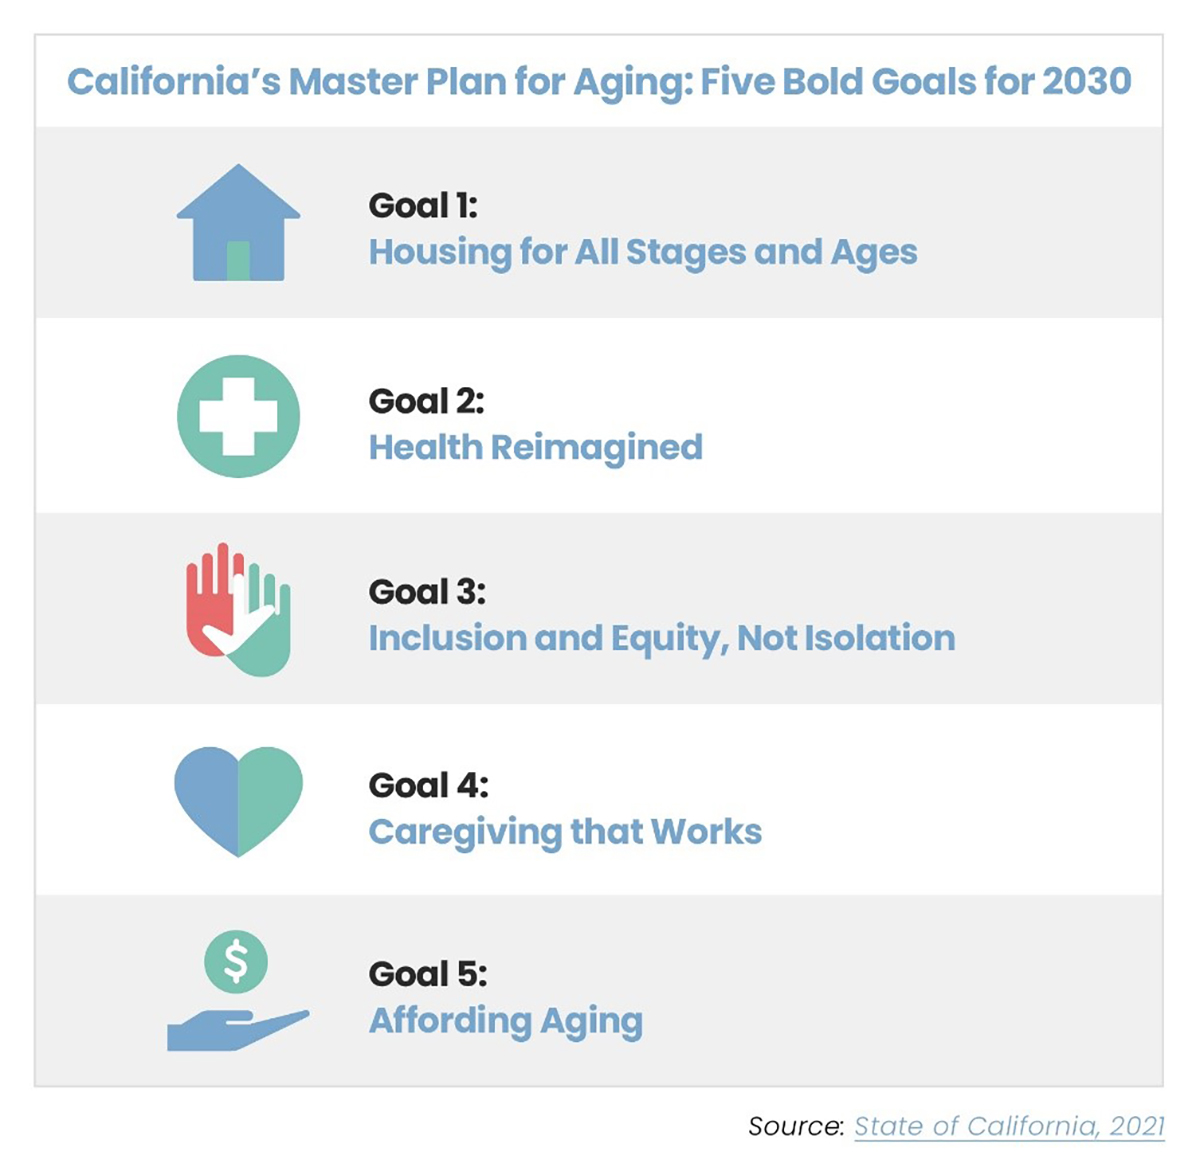 California's Master Plan for Aging: Five Bold Goals for 2030